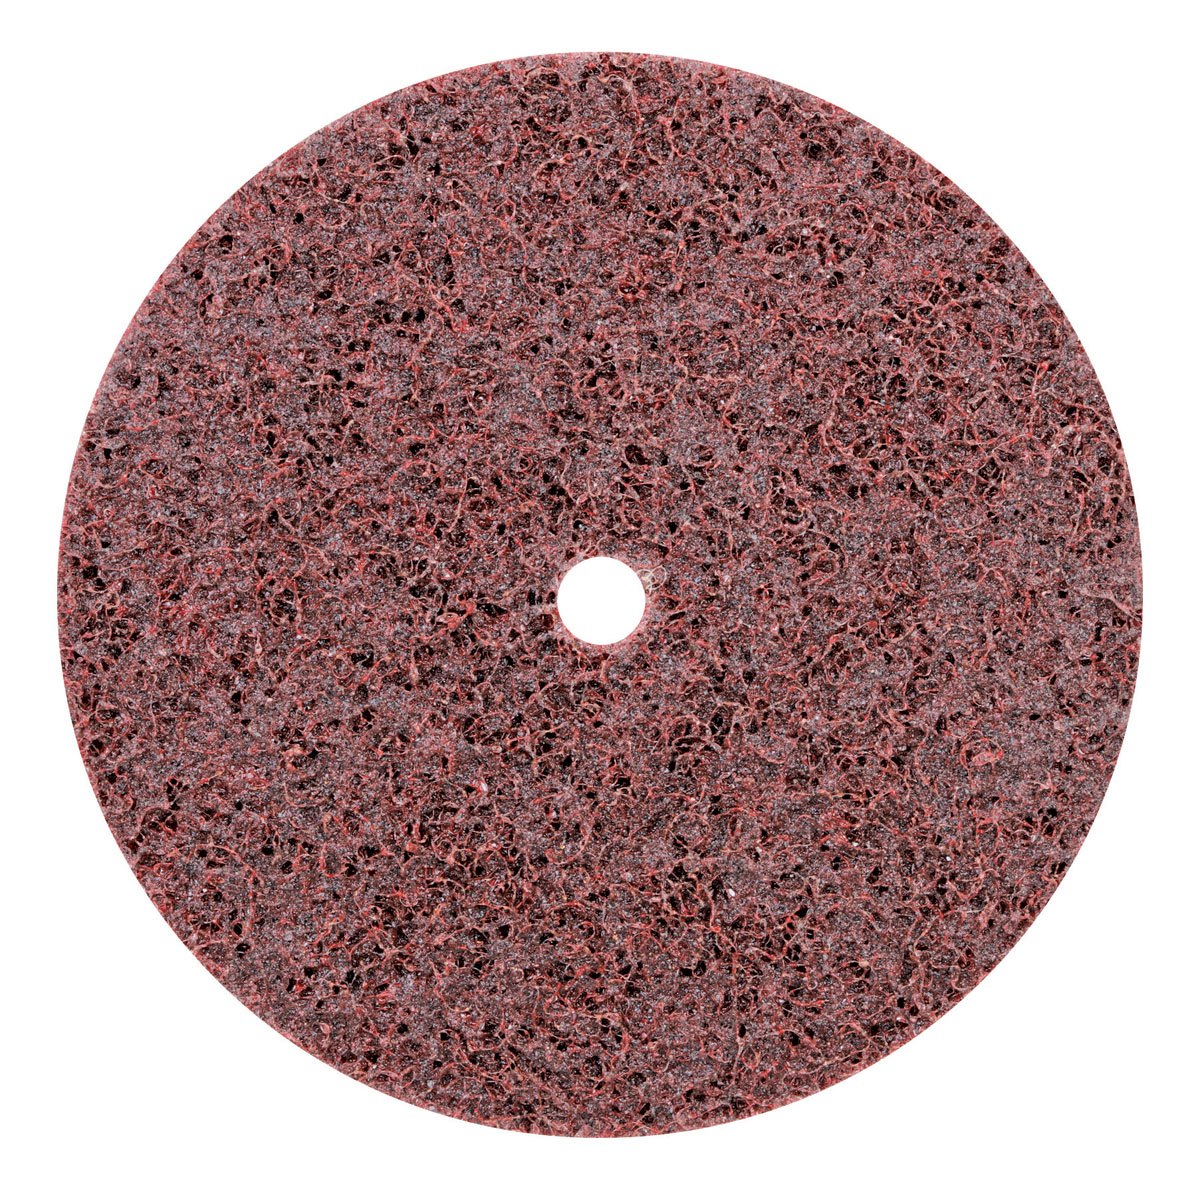 4-1/2" (114 mm) Dia. x 3/8" Medium DynaBrite Surface Conditioning Disc